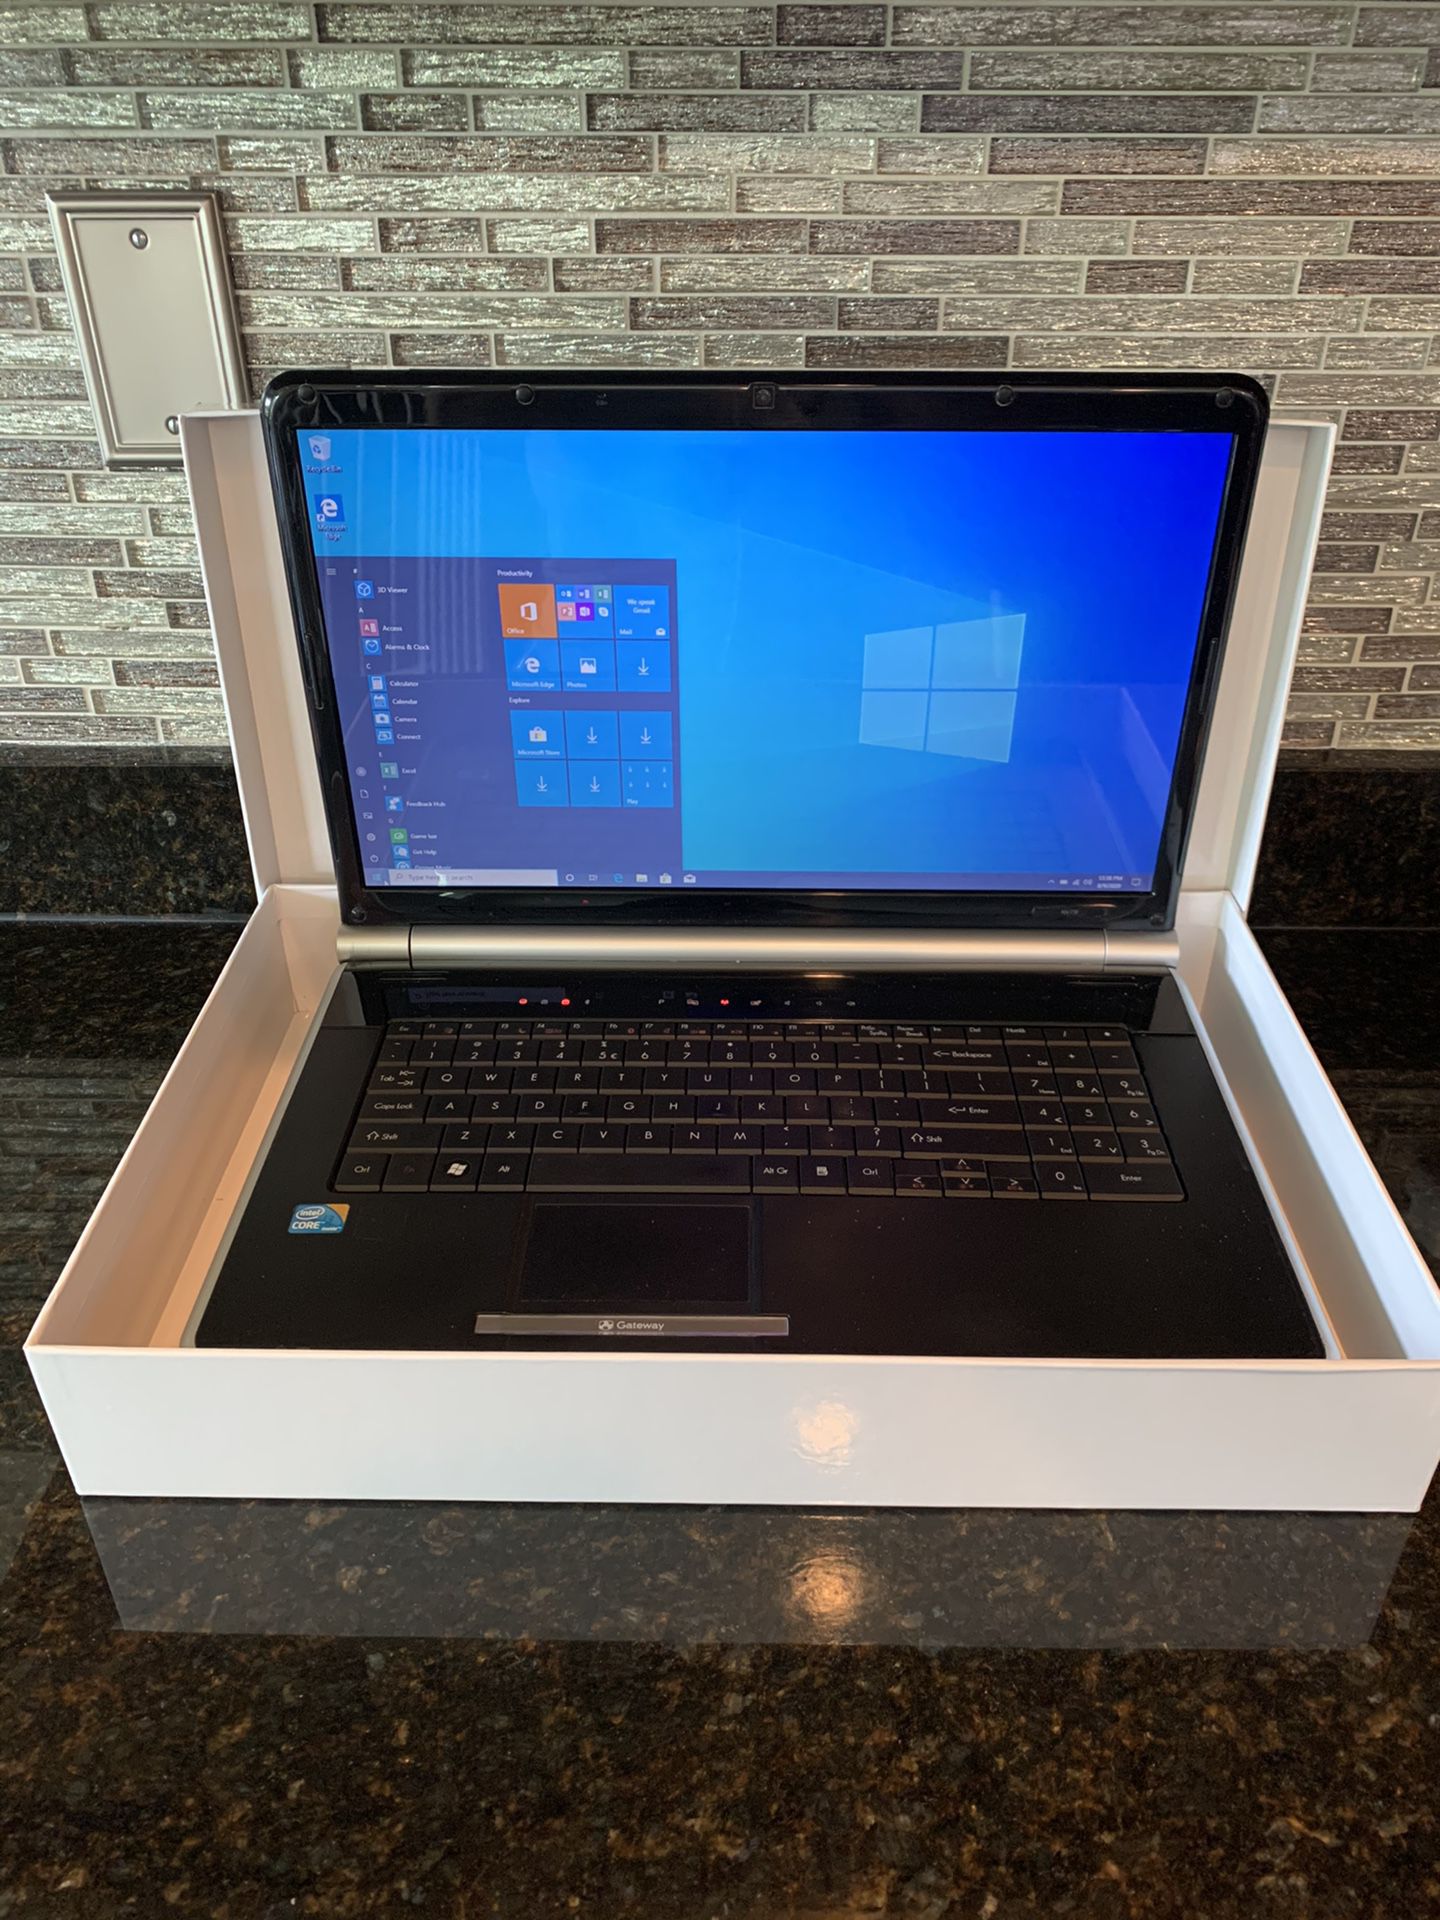 17” Gateway NV79 Laptop with i5 Processor, HDMI, Webcam, Windows 10, and Microsoft Office